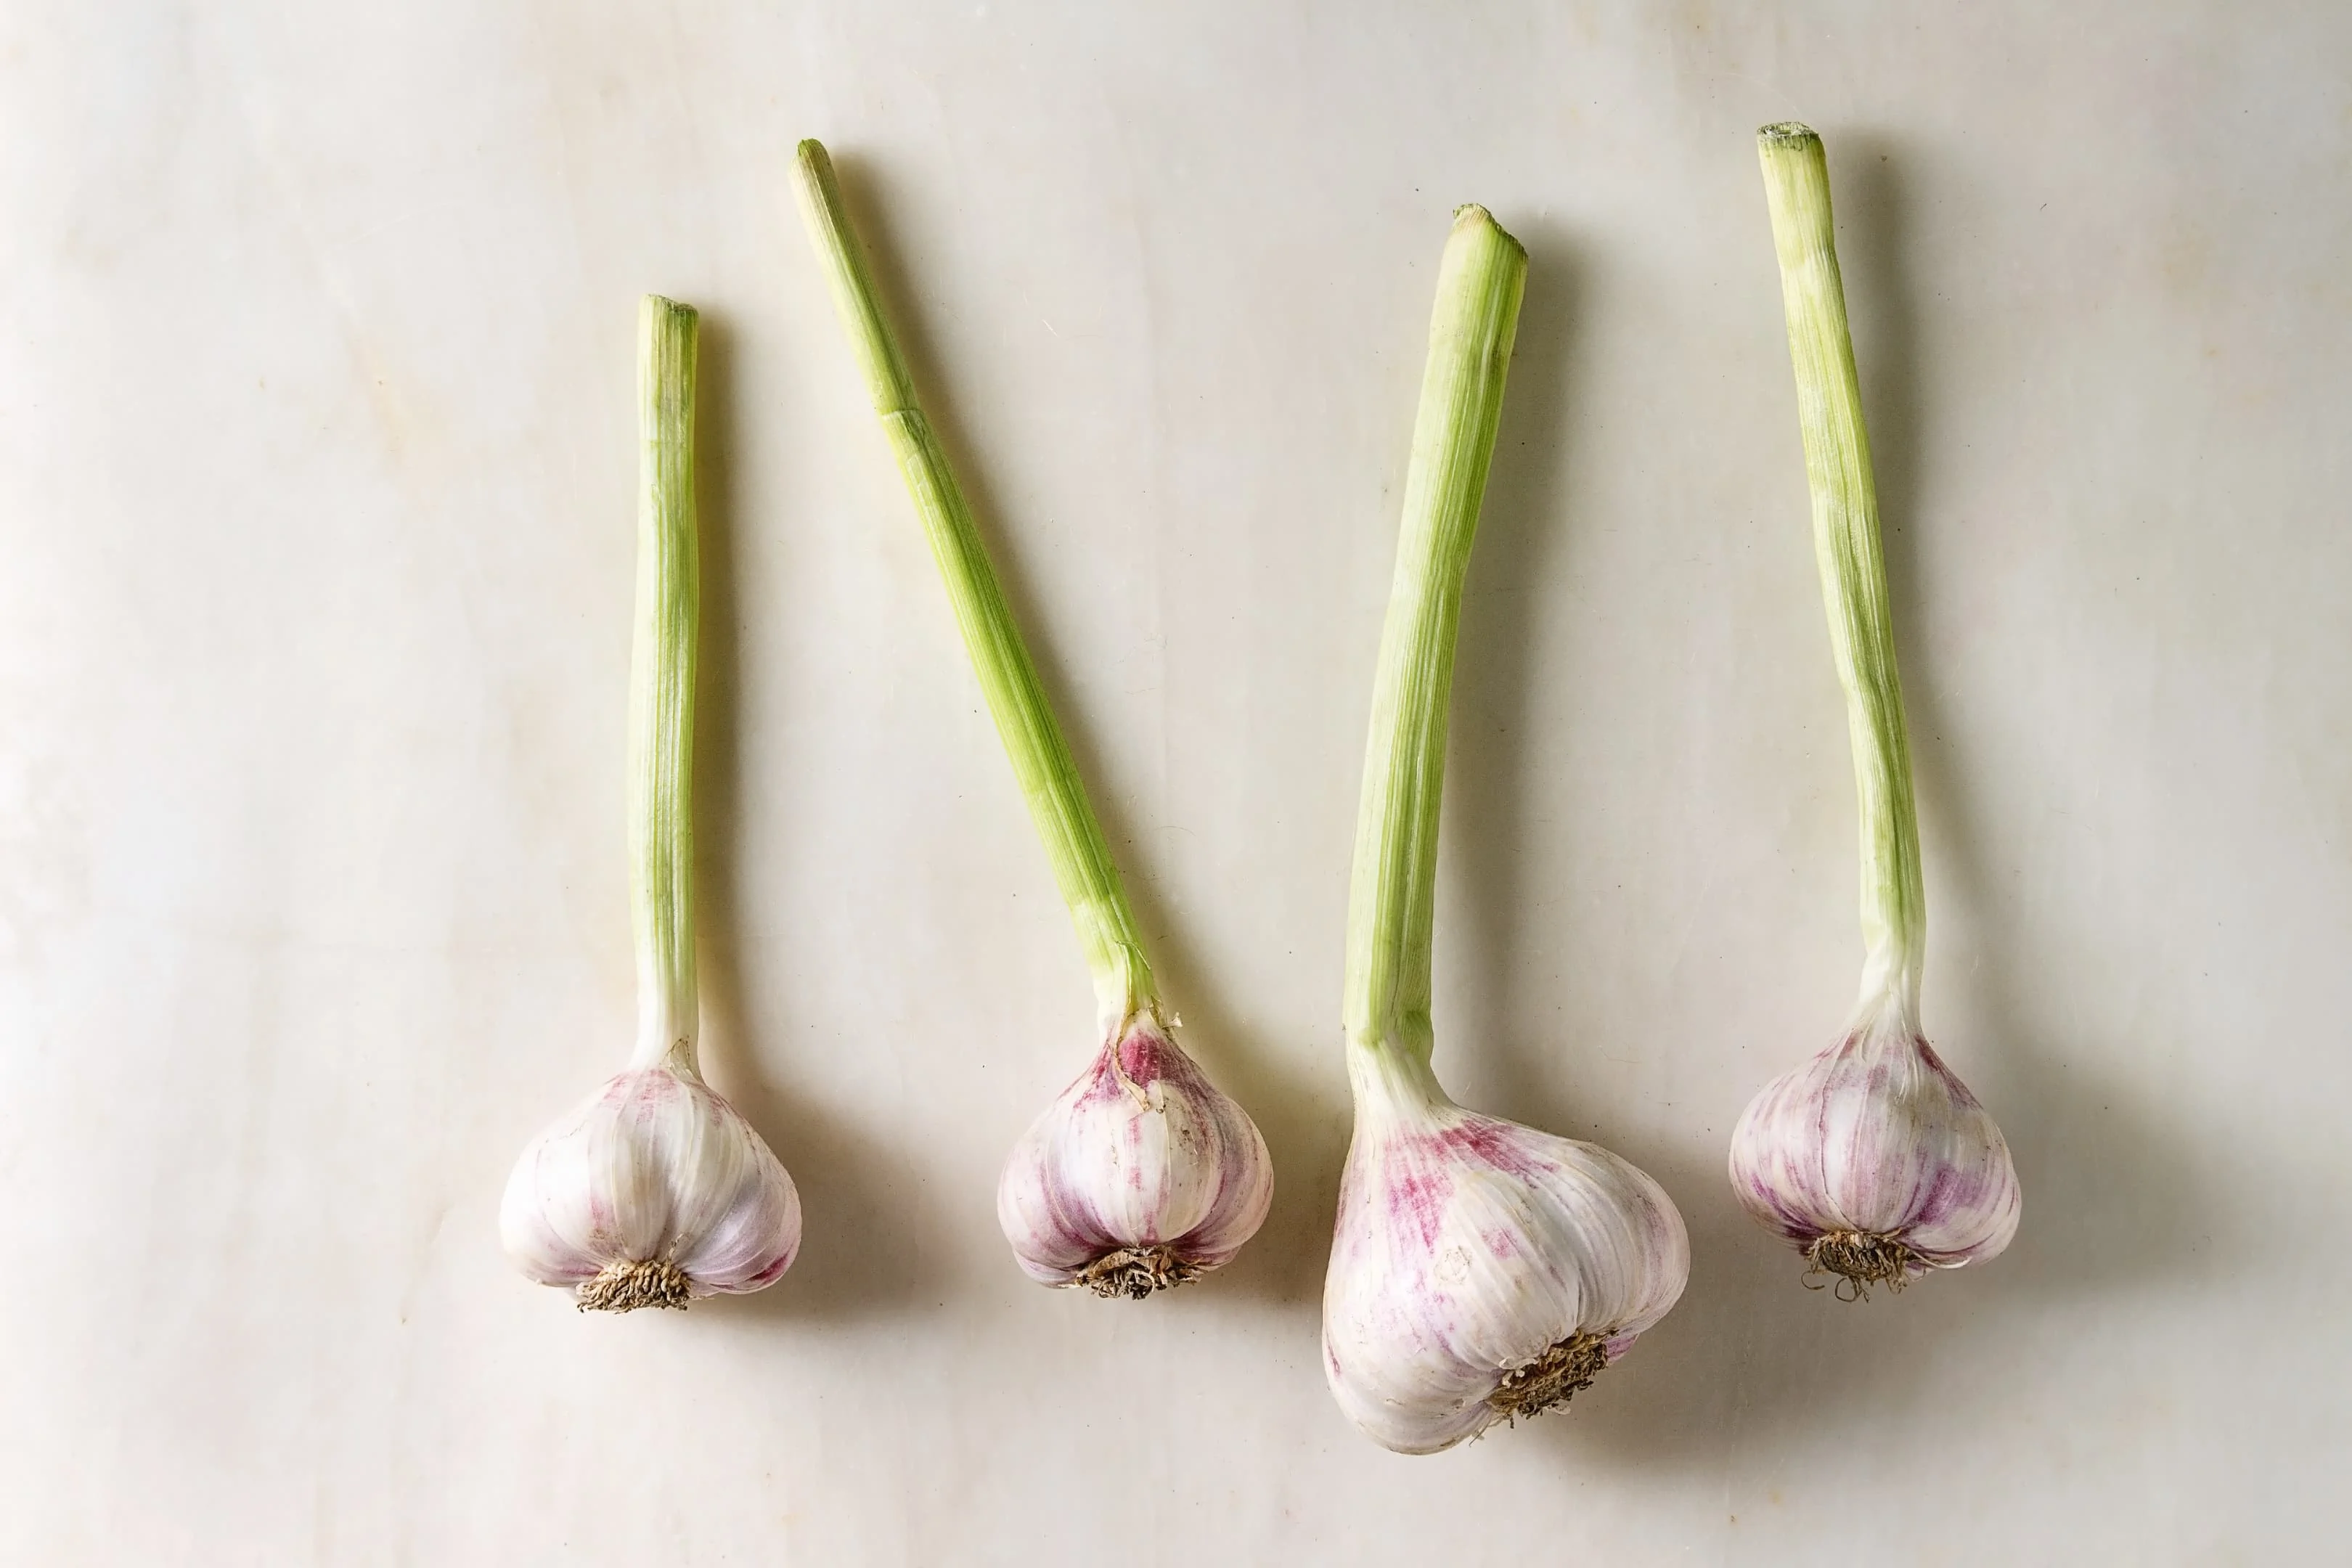 Bundles of young garden garlic, on out list of pungent foods.